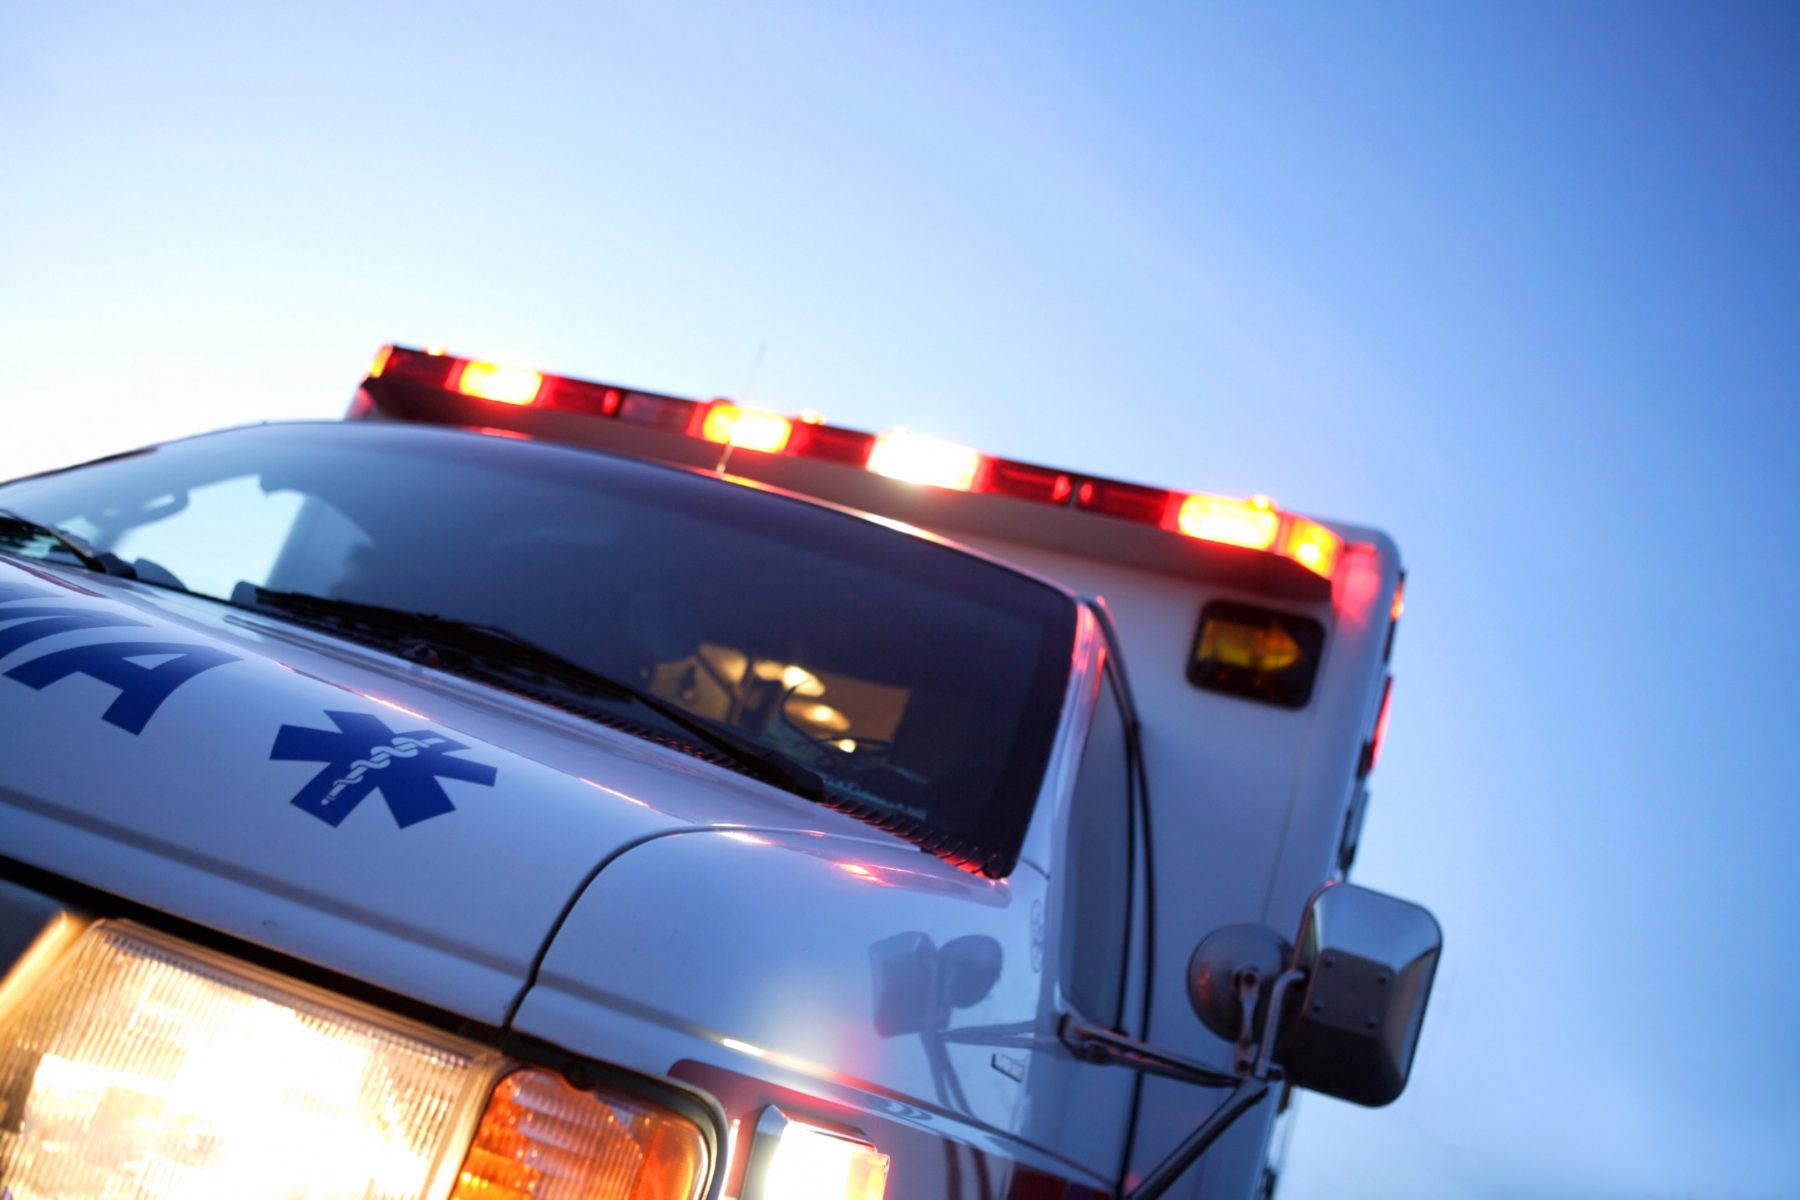 Should you take an ambulance after a car accident?